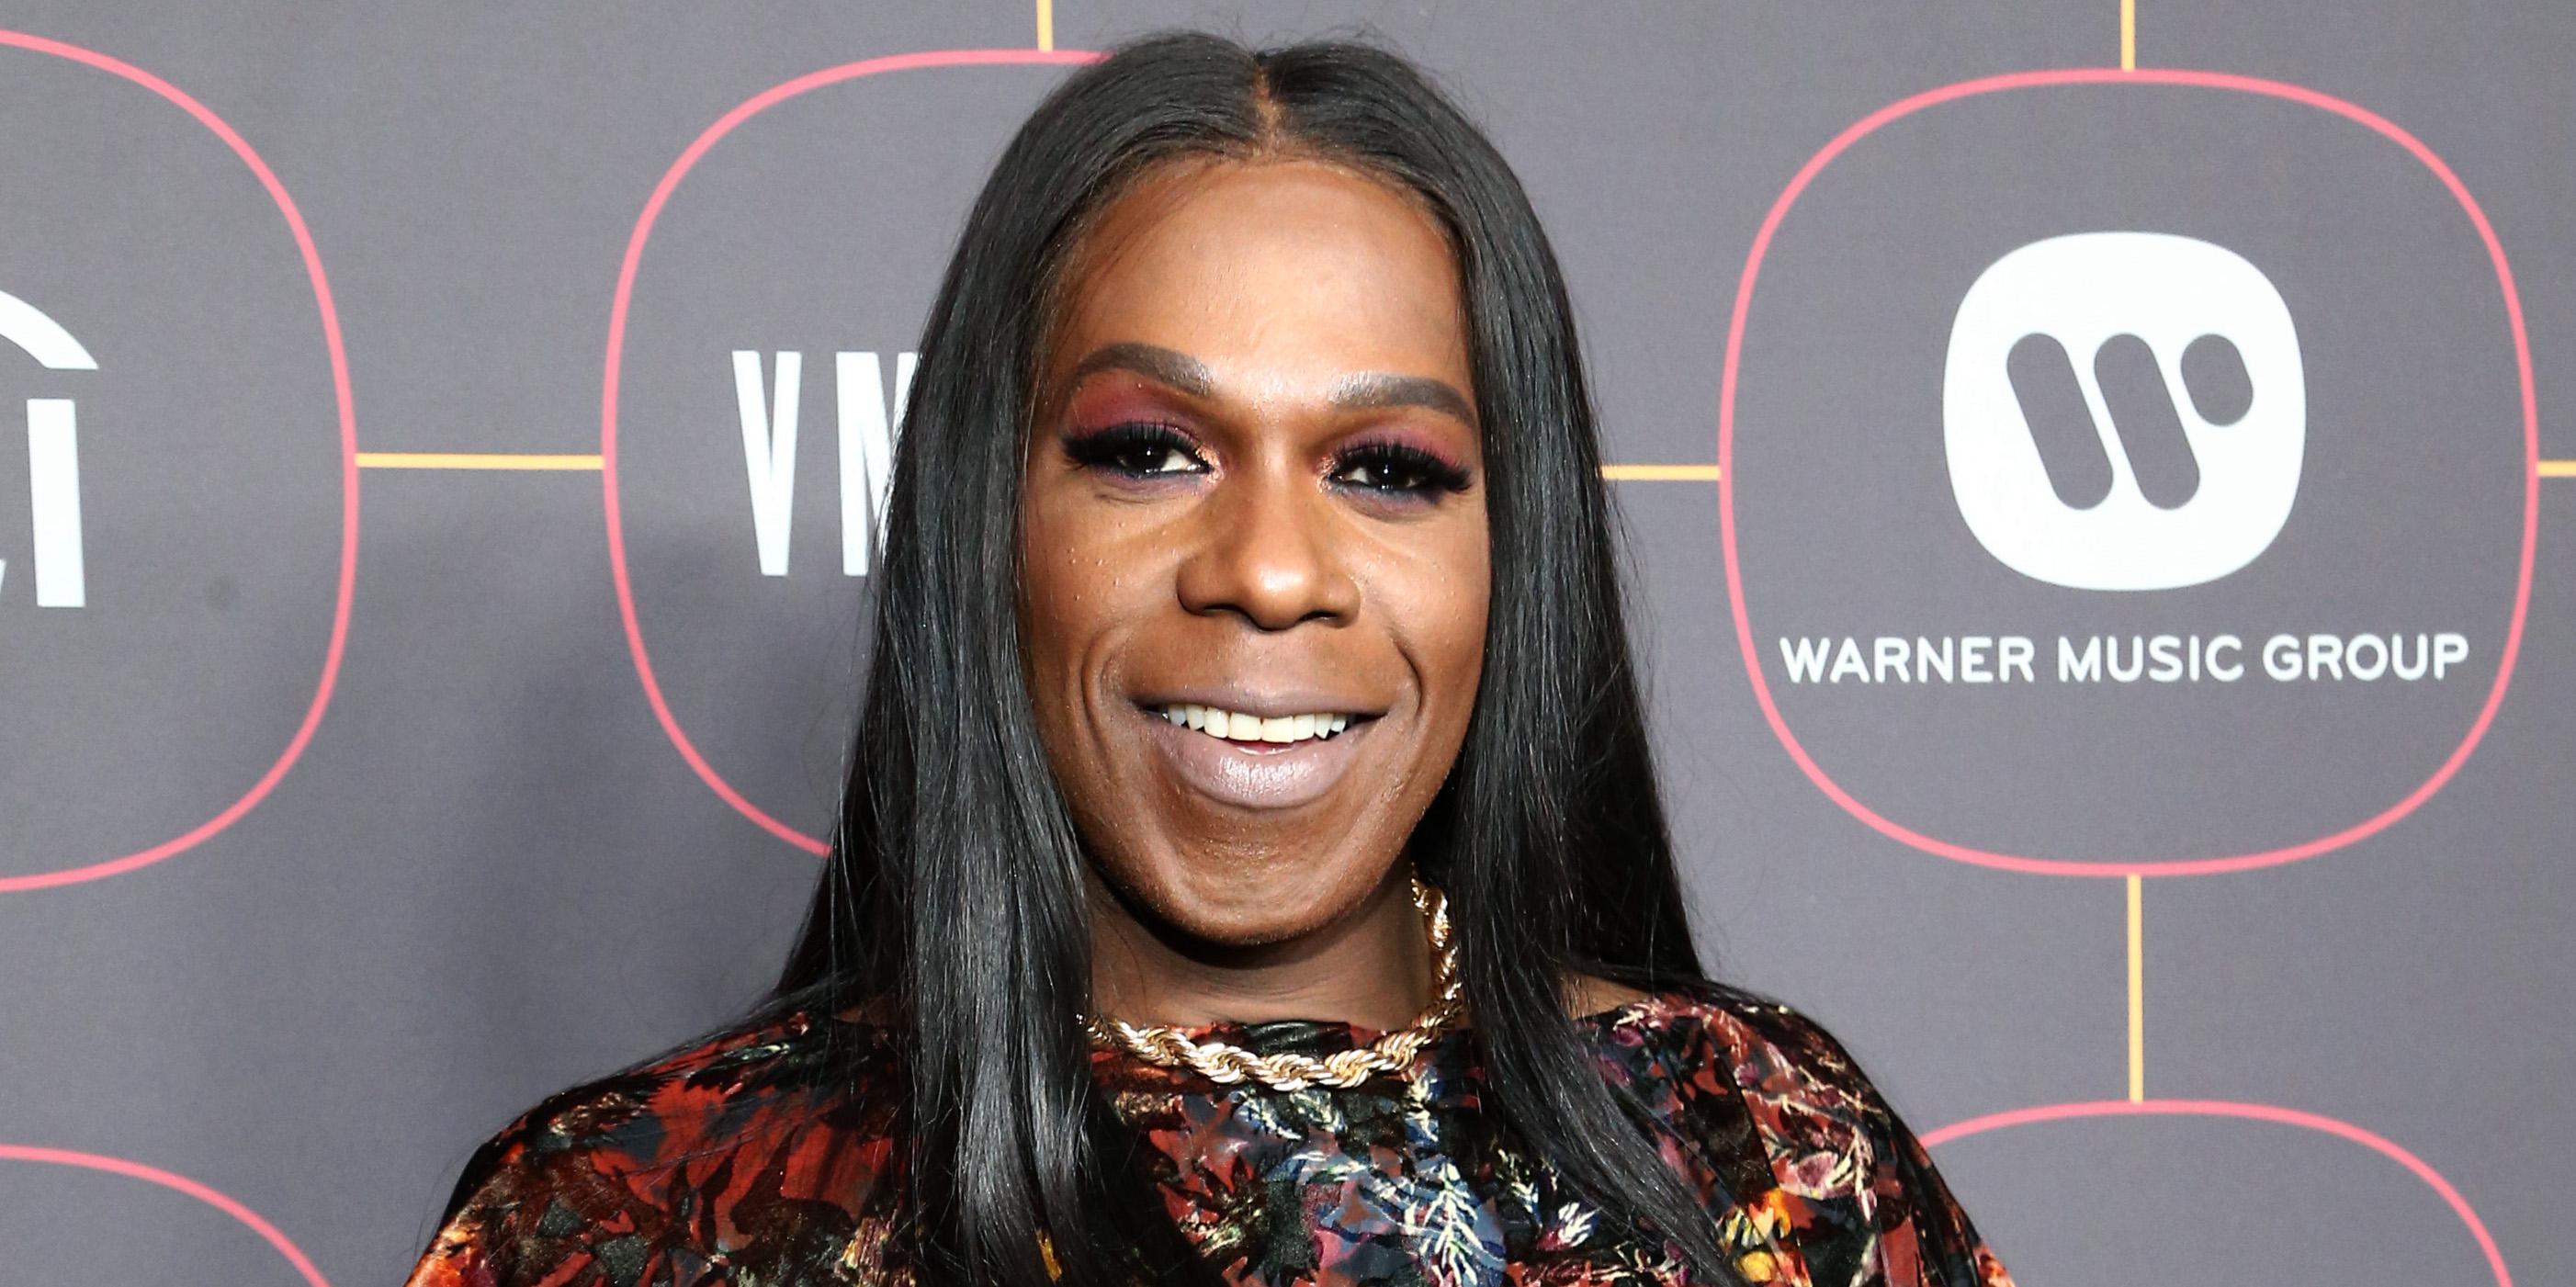 Is Big Freedia Married? Are She and Her Fiancé Devon Still Together?